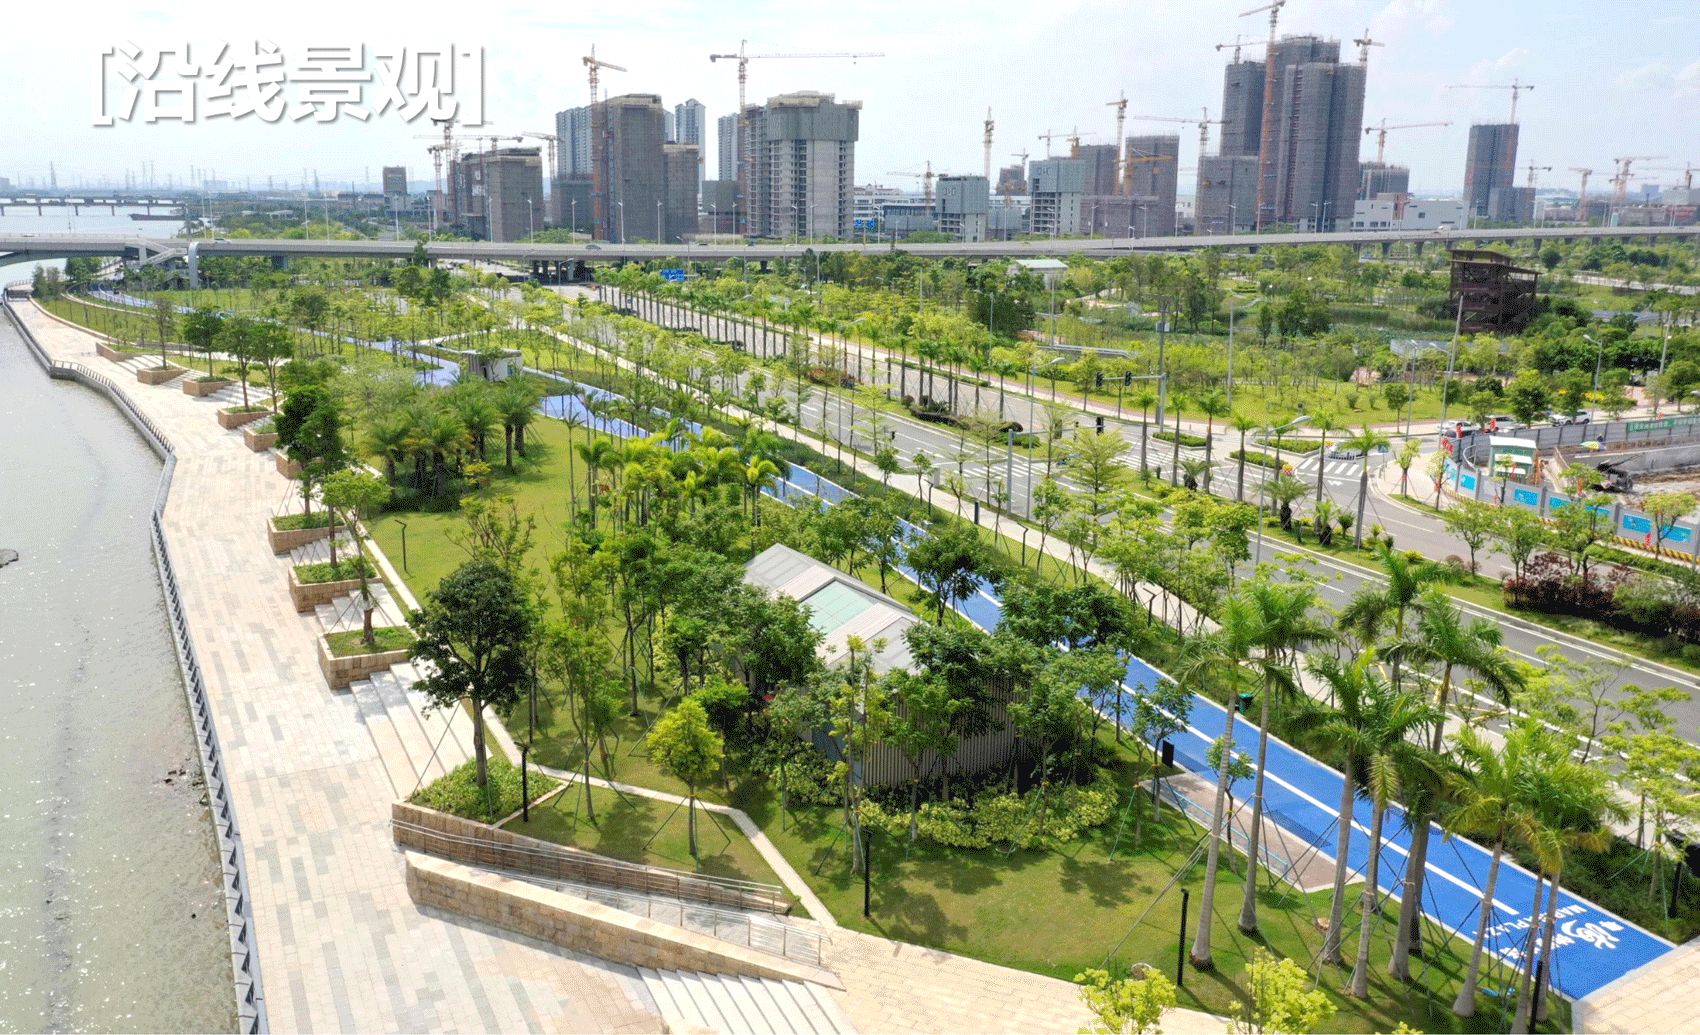 Nansha Lingshan Island Sustainable Development of Waterfront New Town won the 2020 Asian Townscape Award